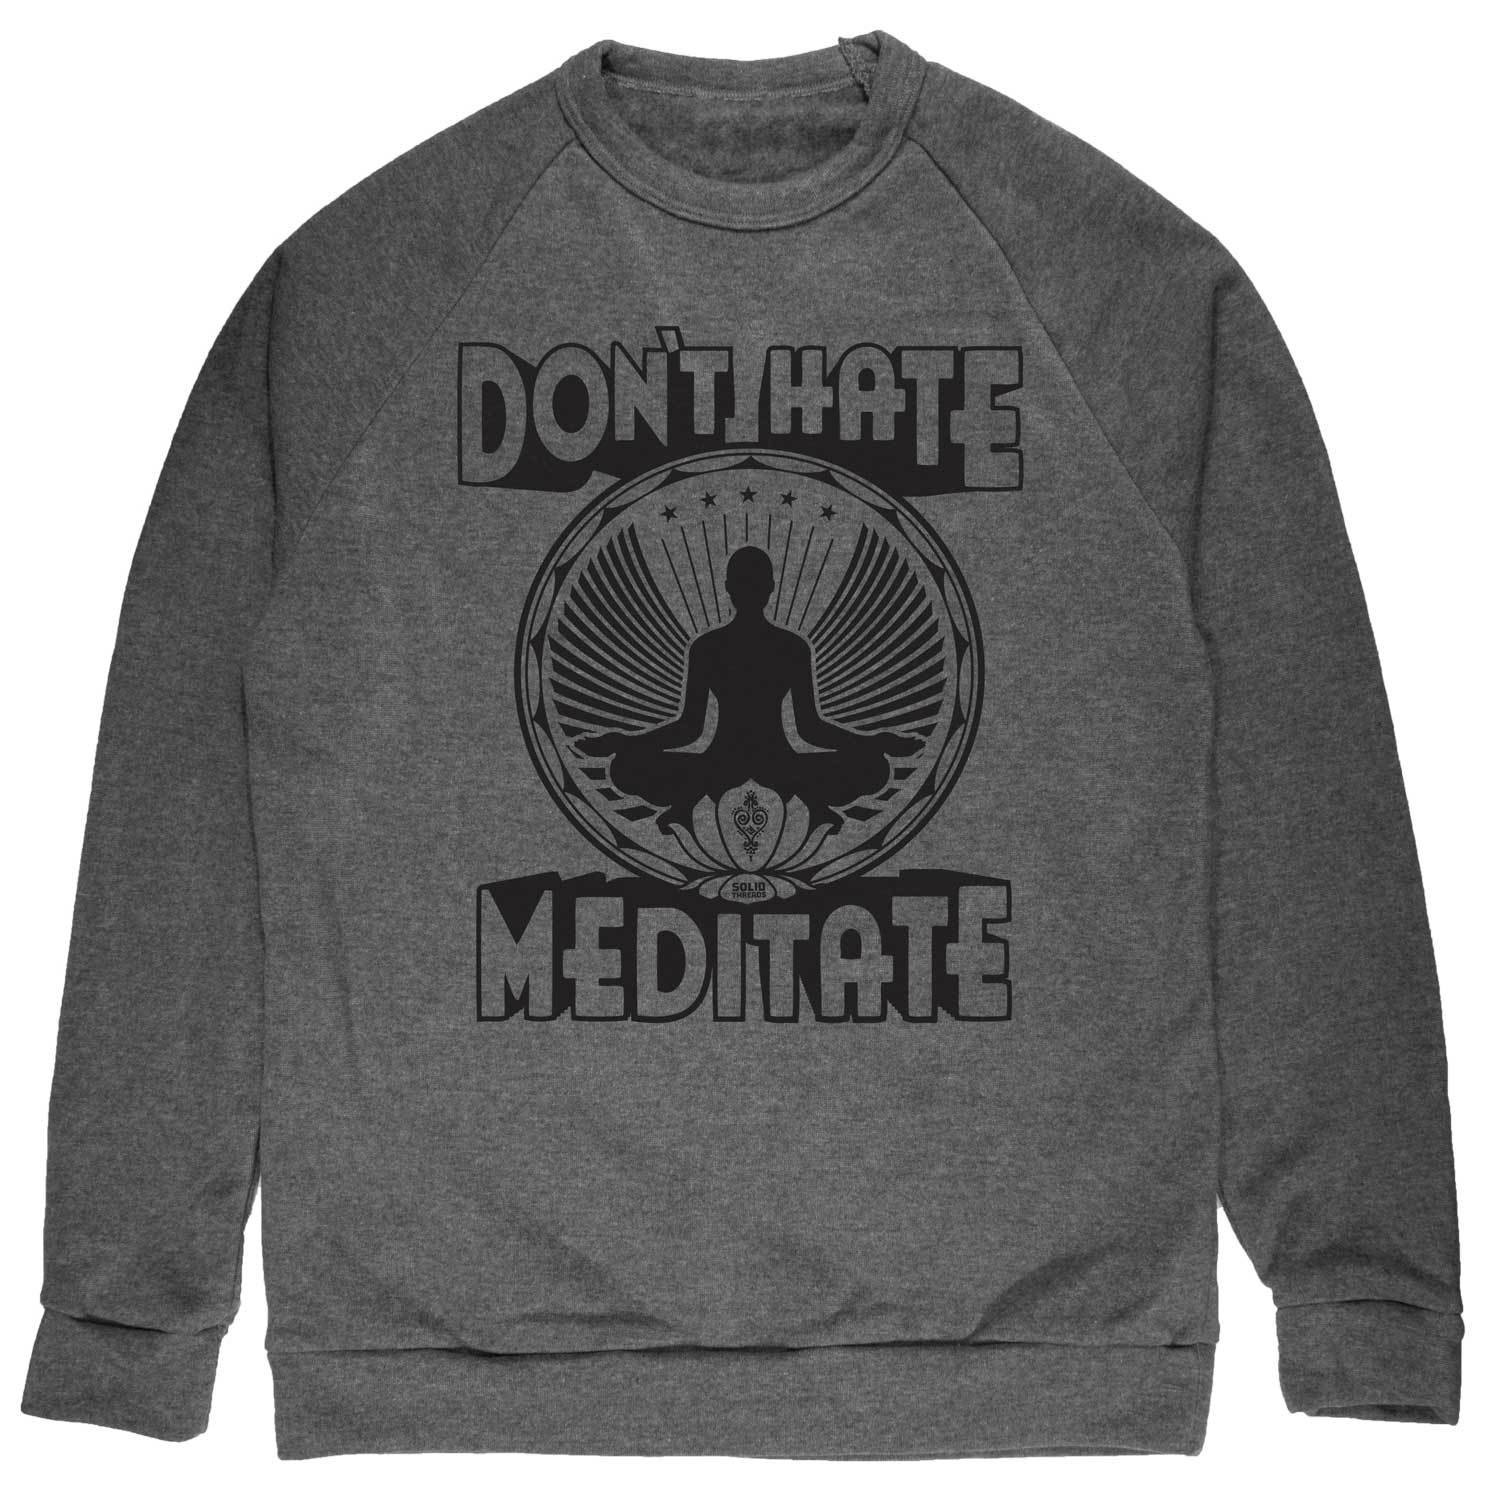 Don't Hate Meditate Vintage Inspired Fleece Crewneck Sweatshirt with cool yoga graphic | Solid Threads